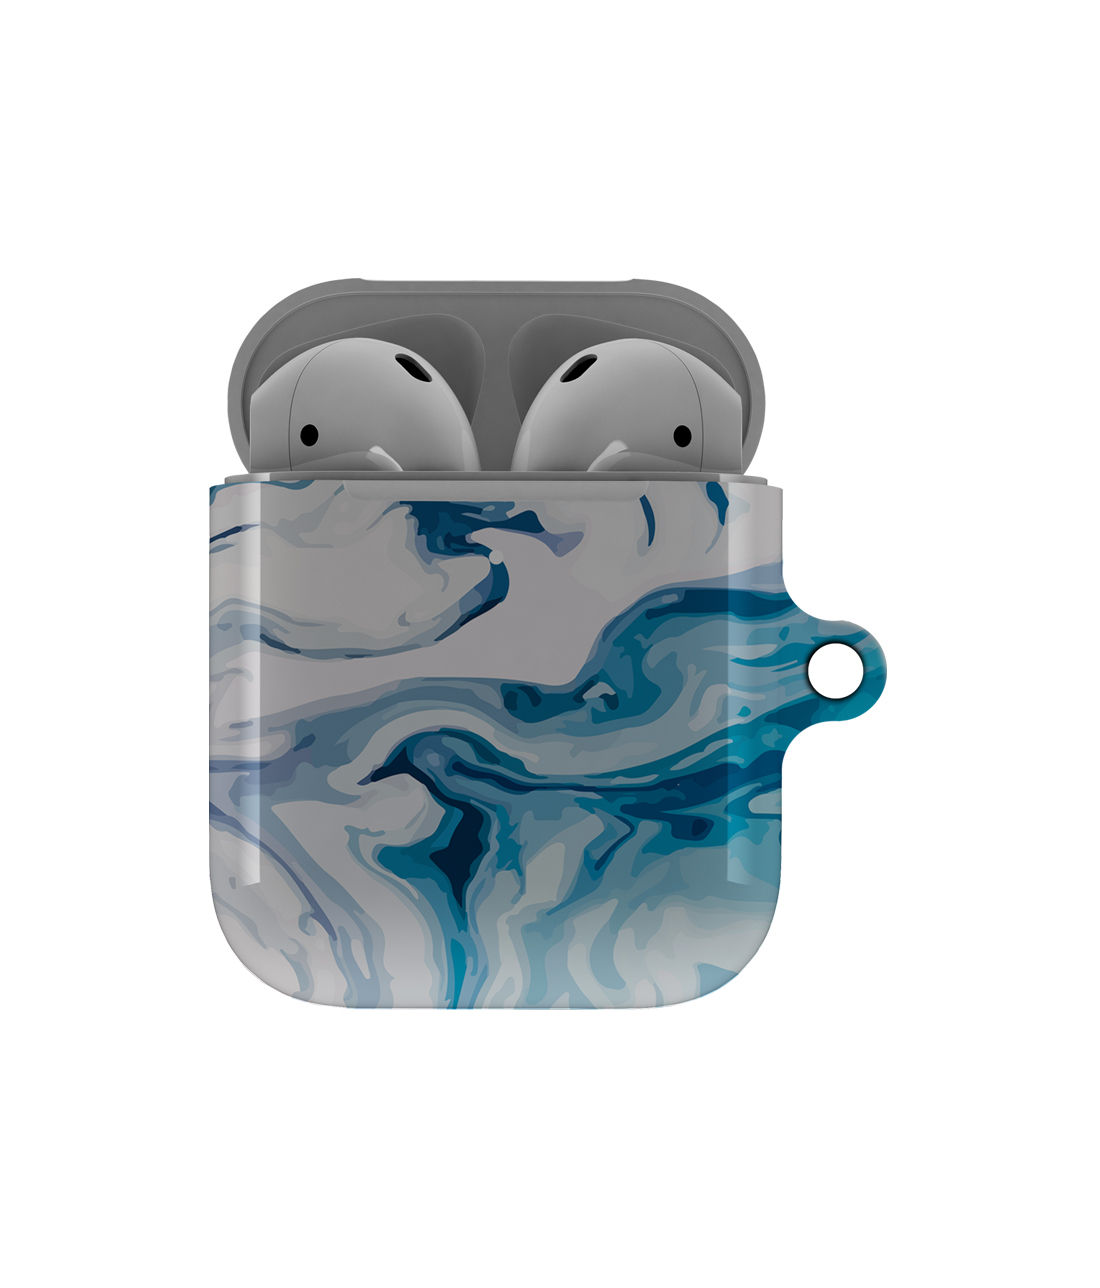 Buy Liquid Funk Turquoise - Hard Shell Airpod Case (2nd Gen) Airpod Cases Online